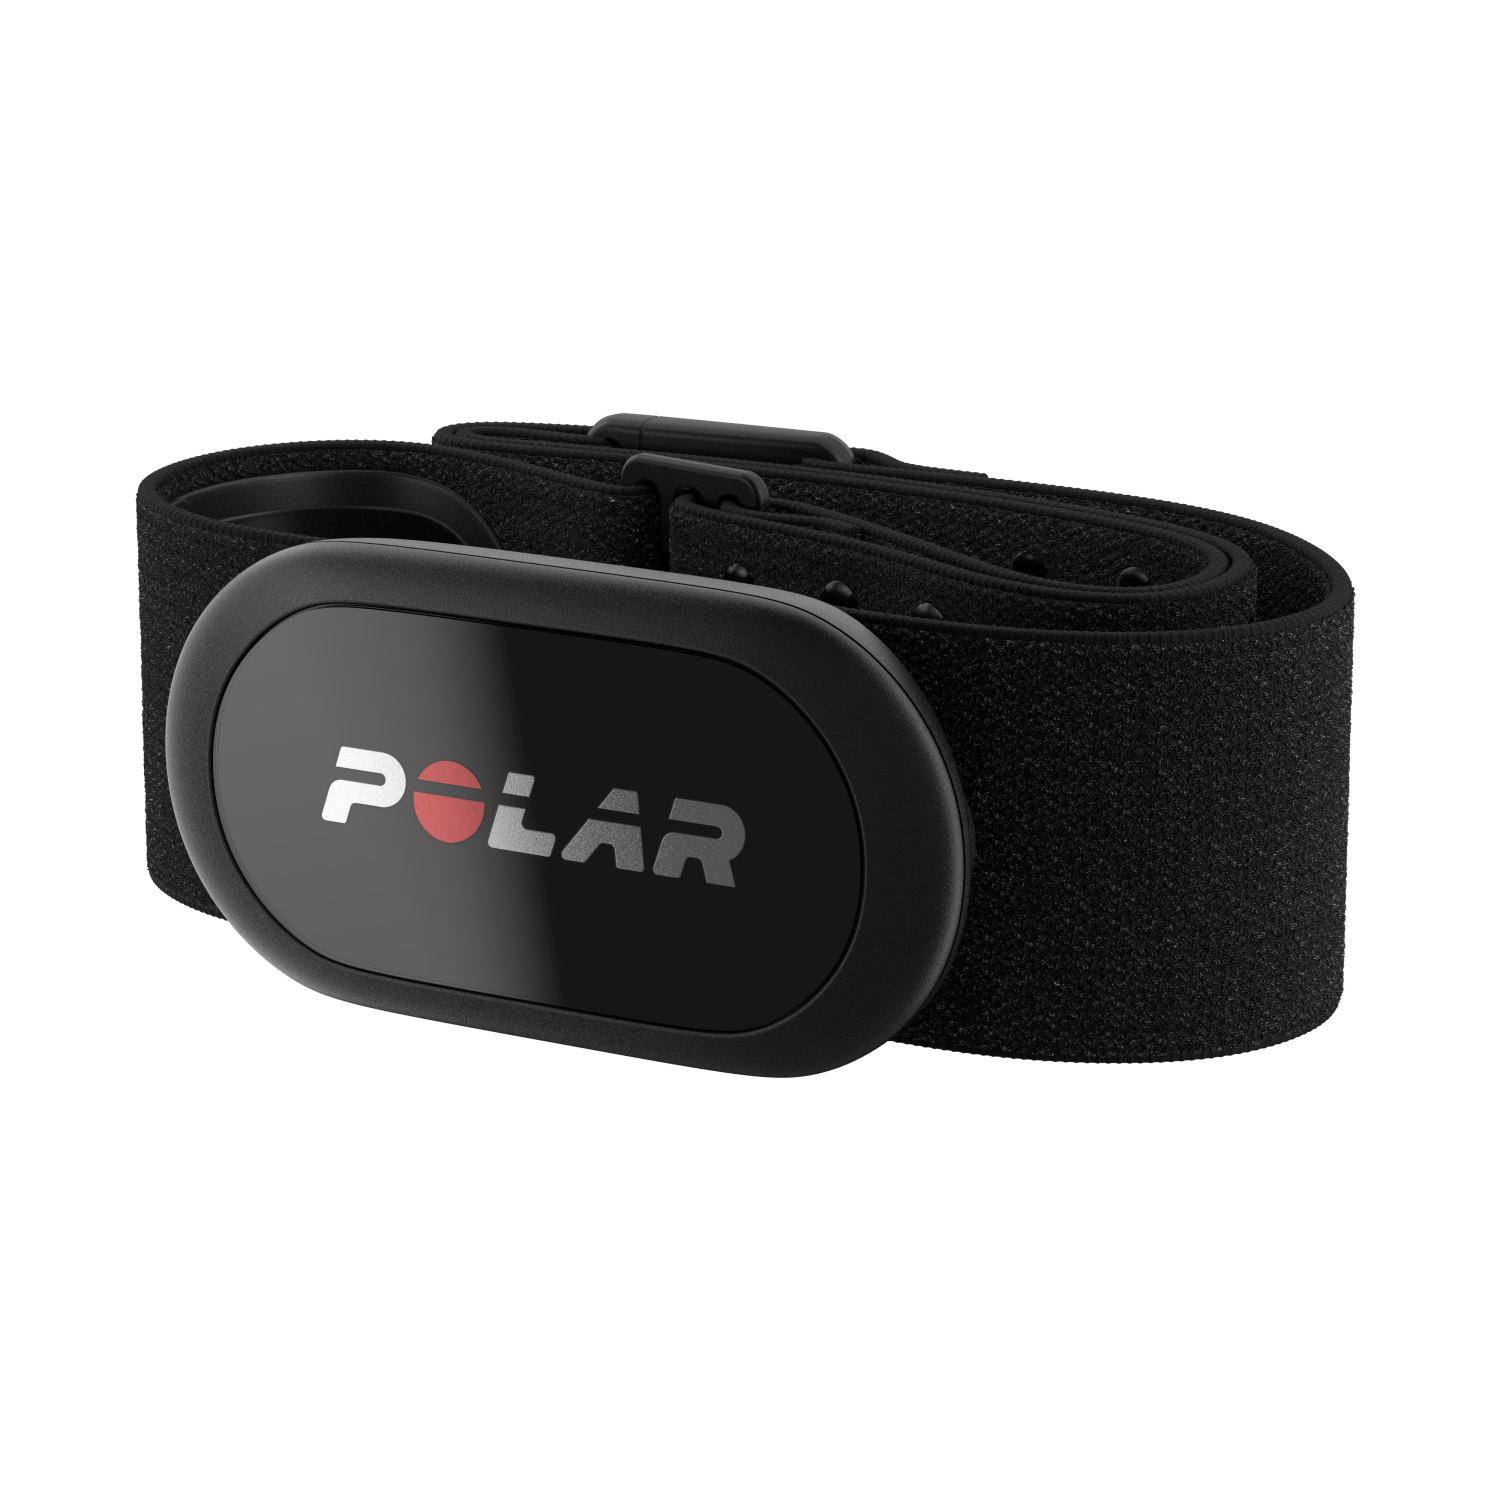 Polar H10 Heart Rate Monitor – ANT+ , Bluetooth – HR Sensor for Men and Women – Built-in Memory - image 3 of 5